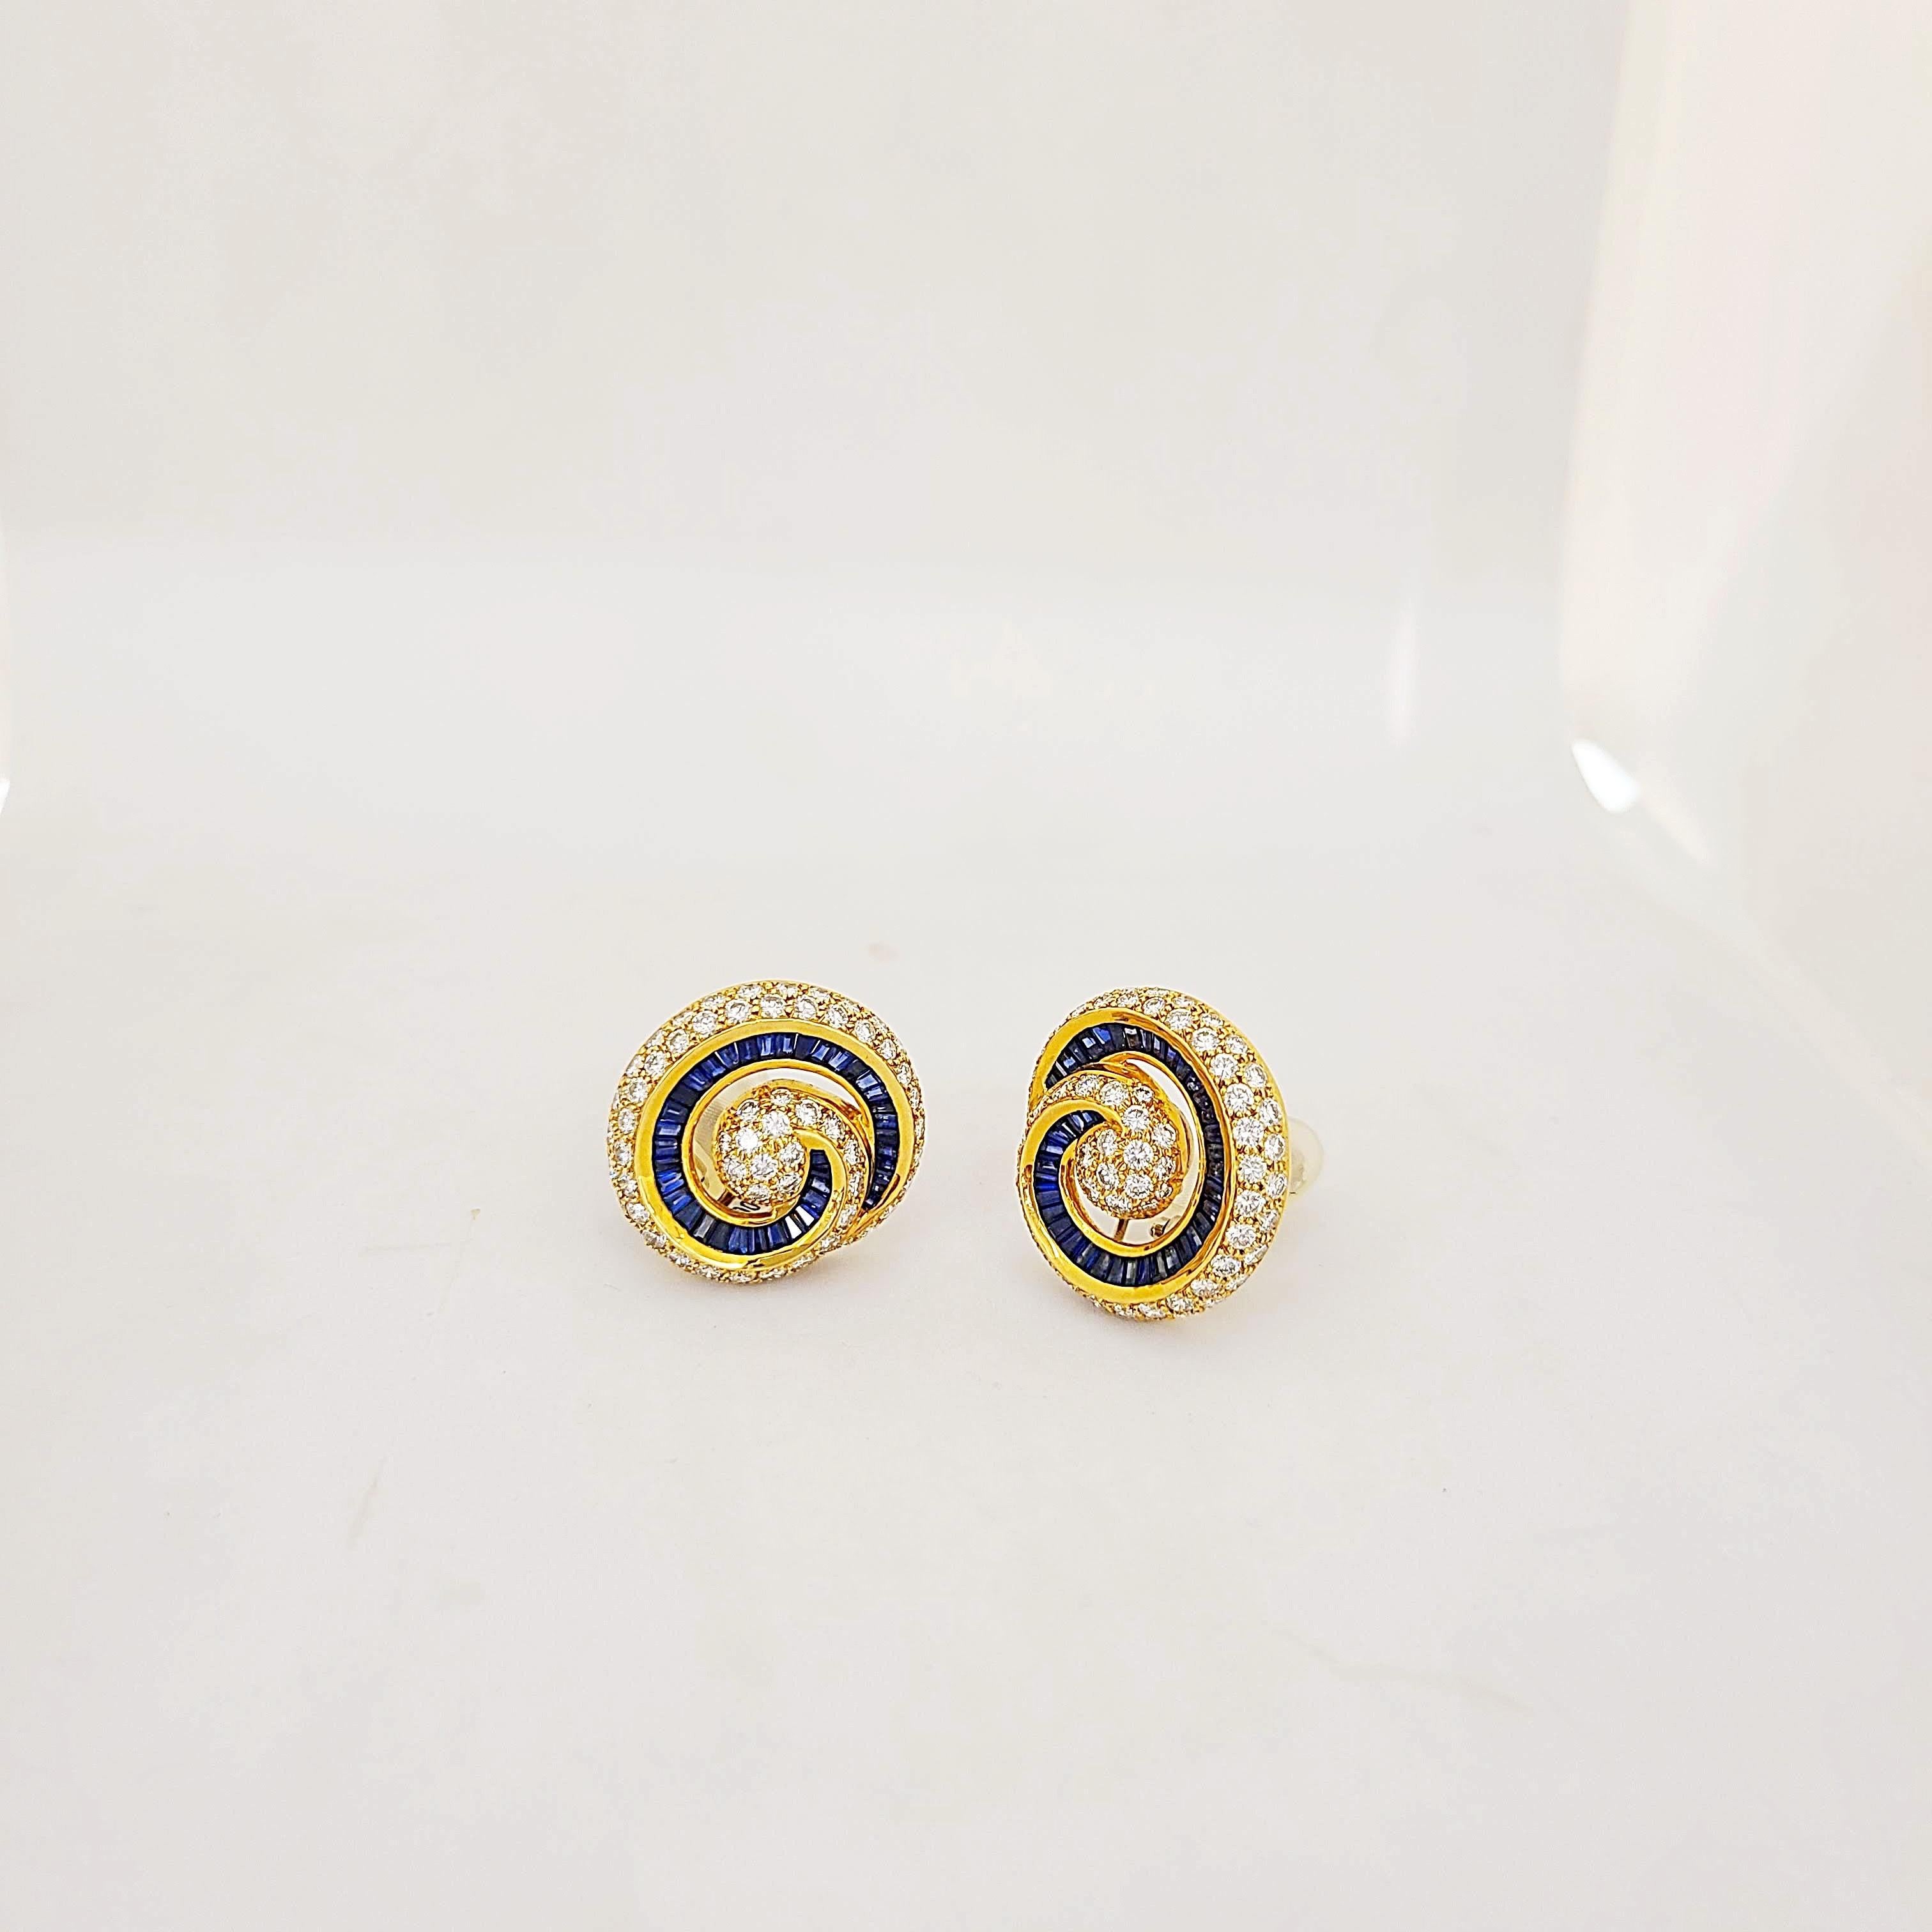 Charles Krypell Jewelry is a New York Based fine jewelry brand that became internationally known for its exquisite use of color, novel designs, and outstanding craftsmanship. 
Set in 18 Karat Yellow Gold, these earrings are composed of 5.60Cts. of